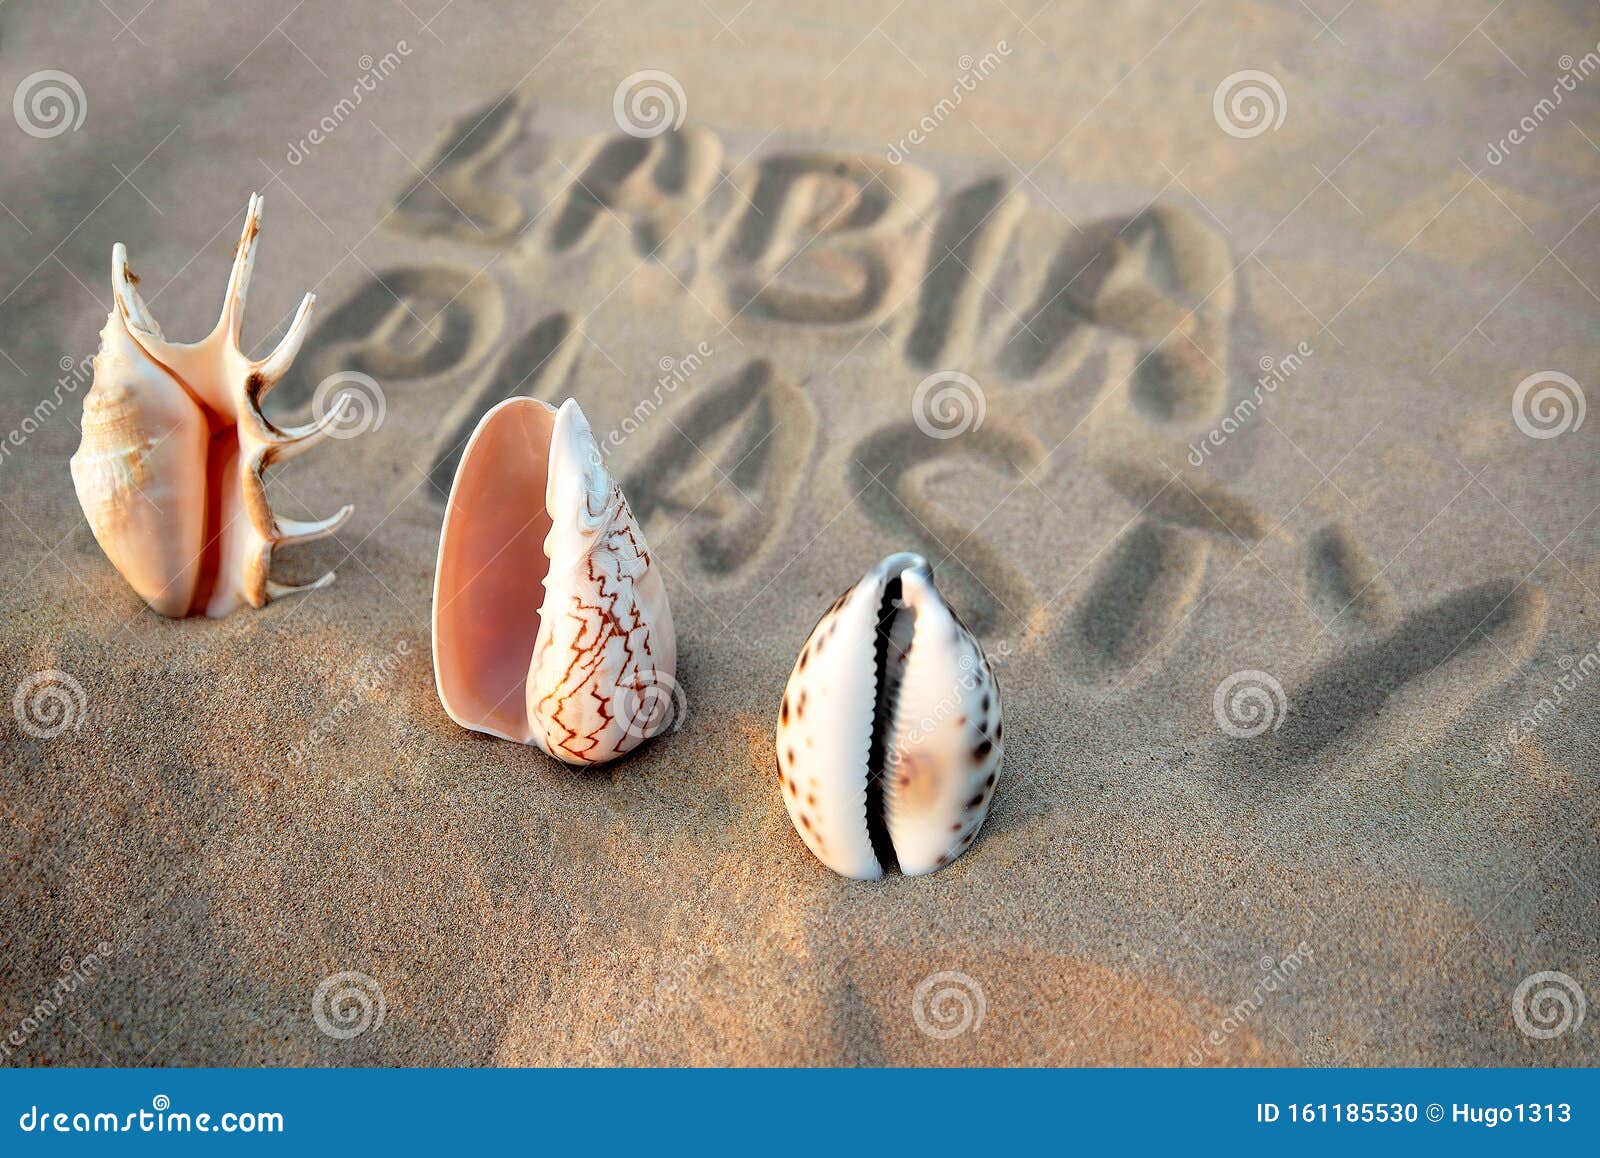 vagina-d seashell on the background of the inscription labiaplasty. female health concept